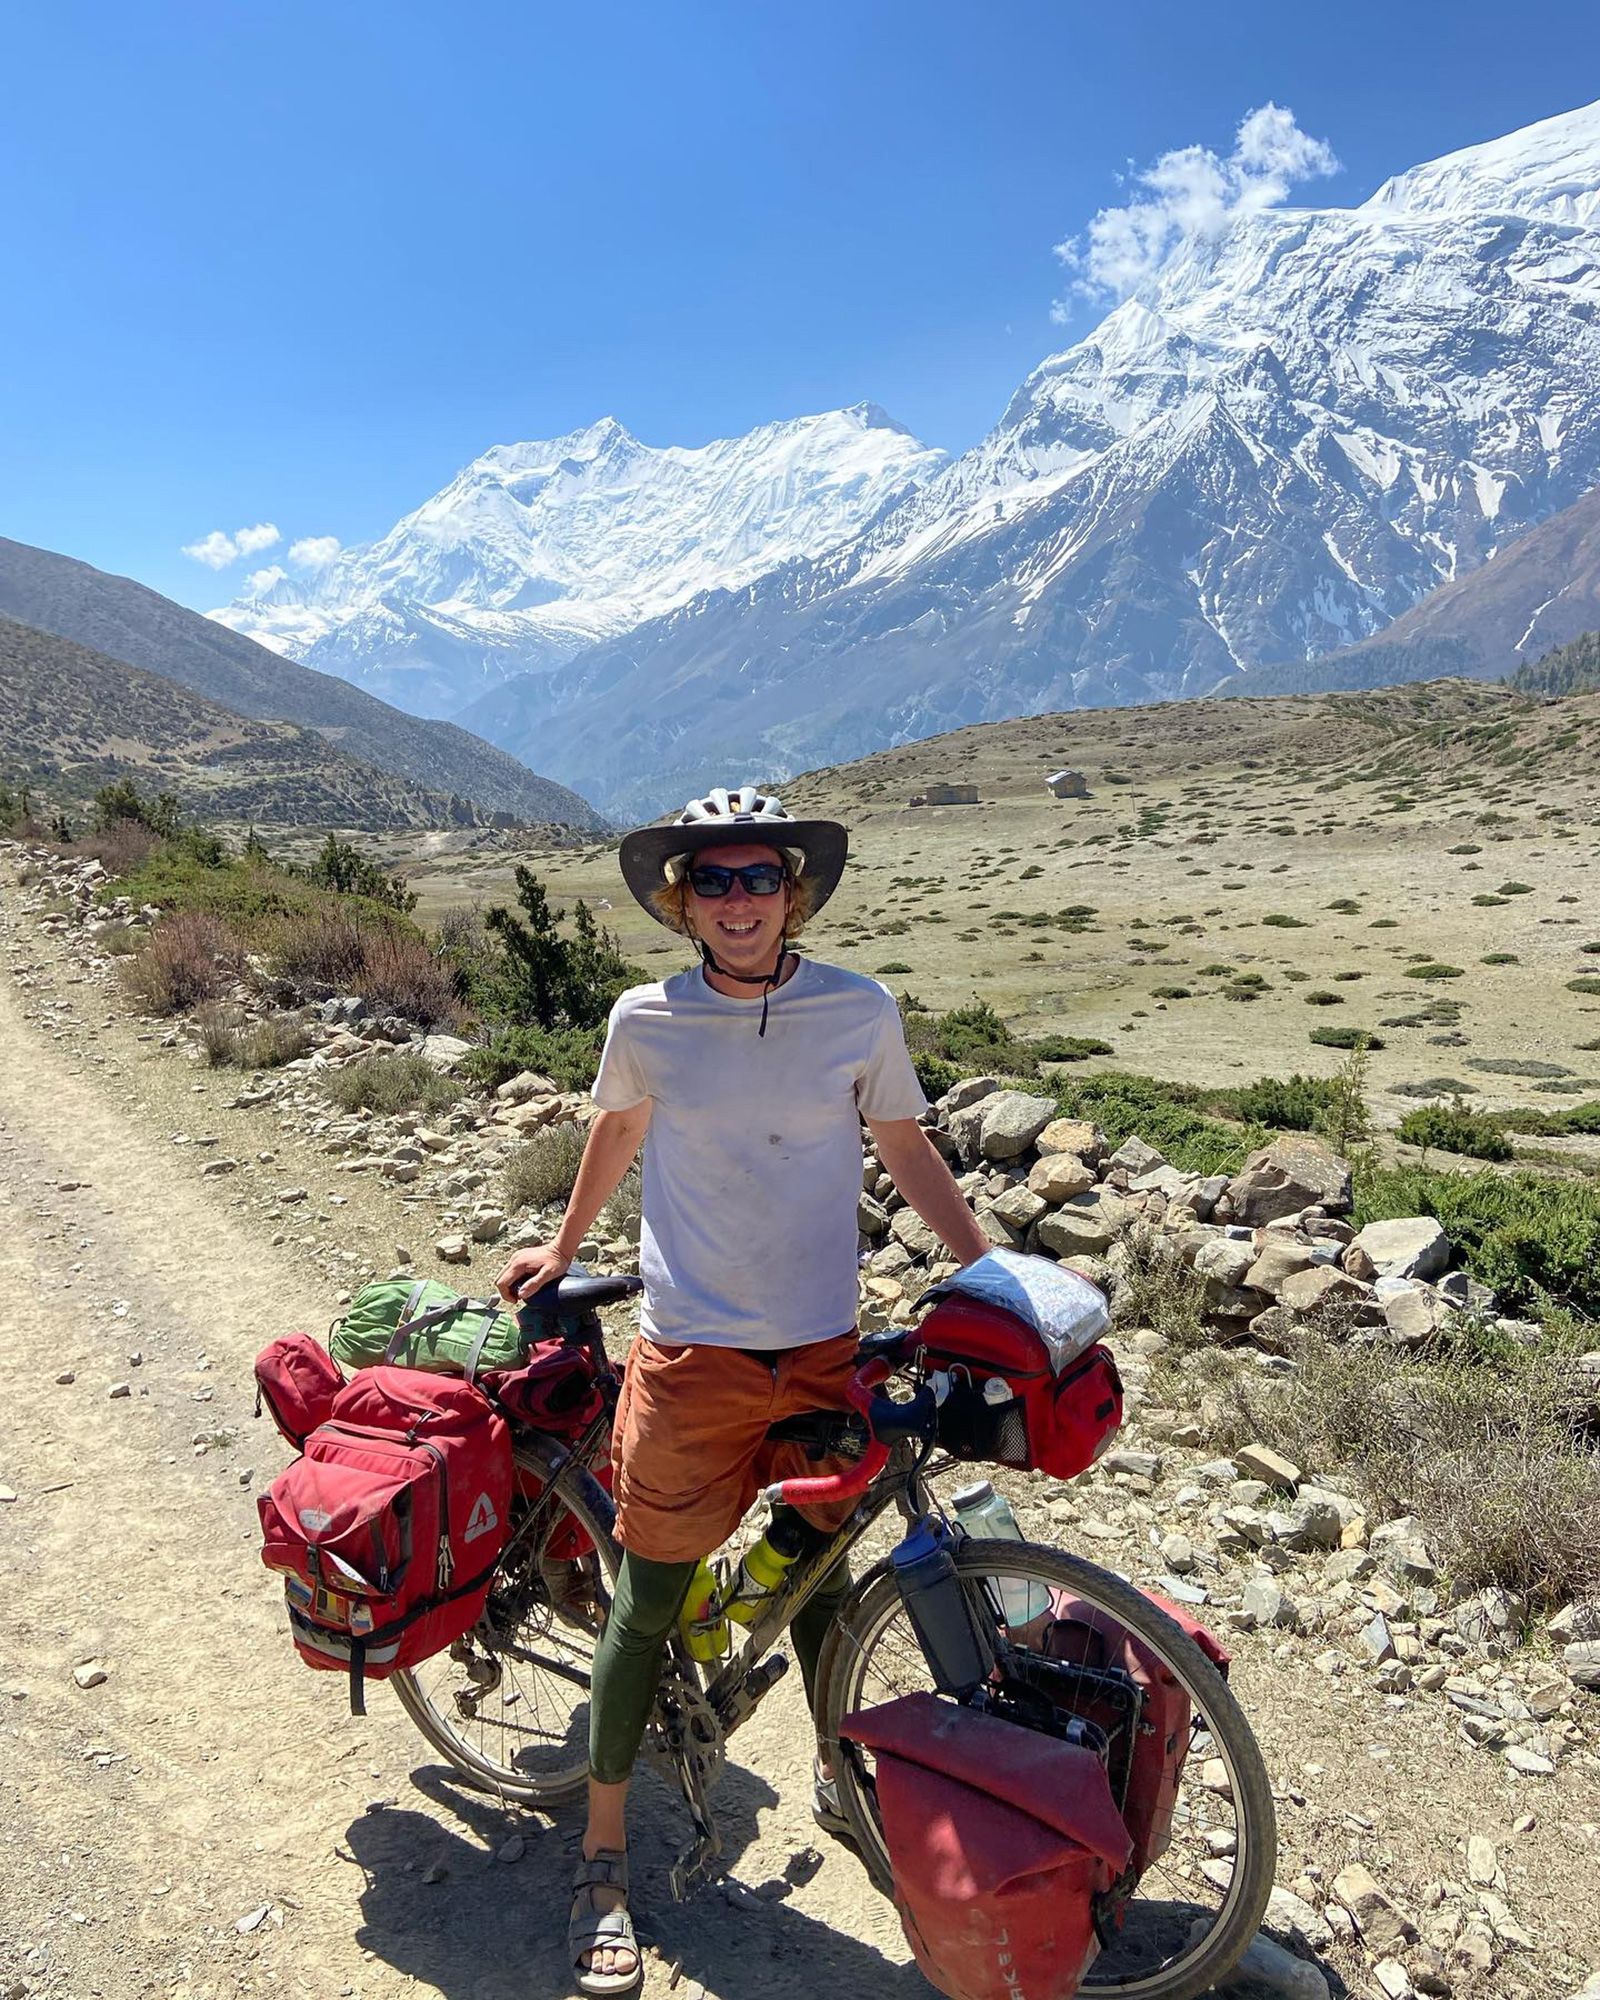 Biking 'Pan-American highway' was just the first leg of teen's journey